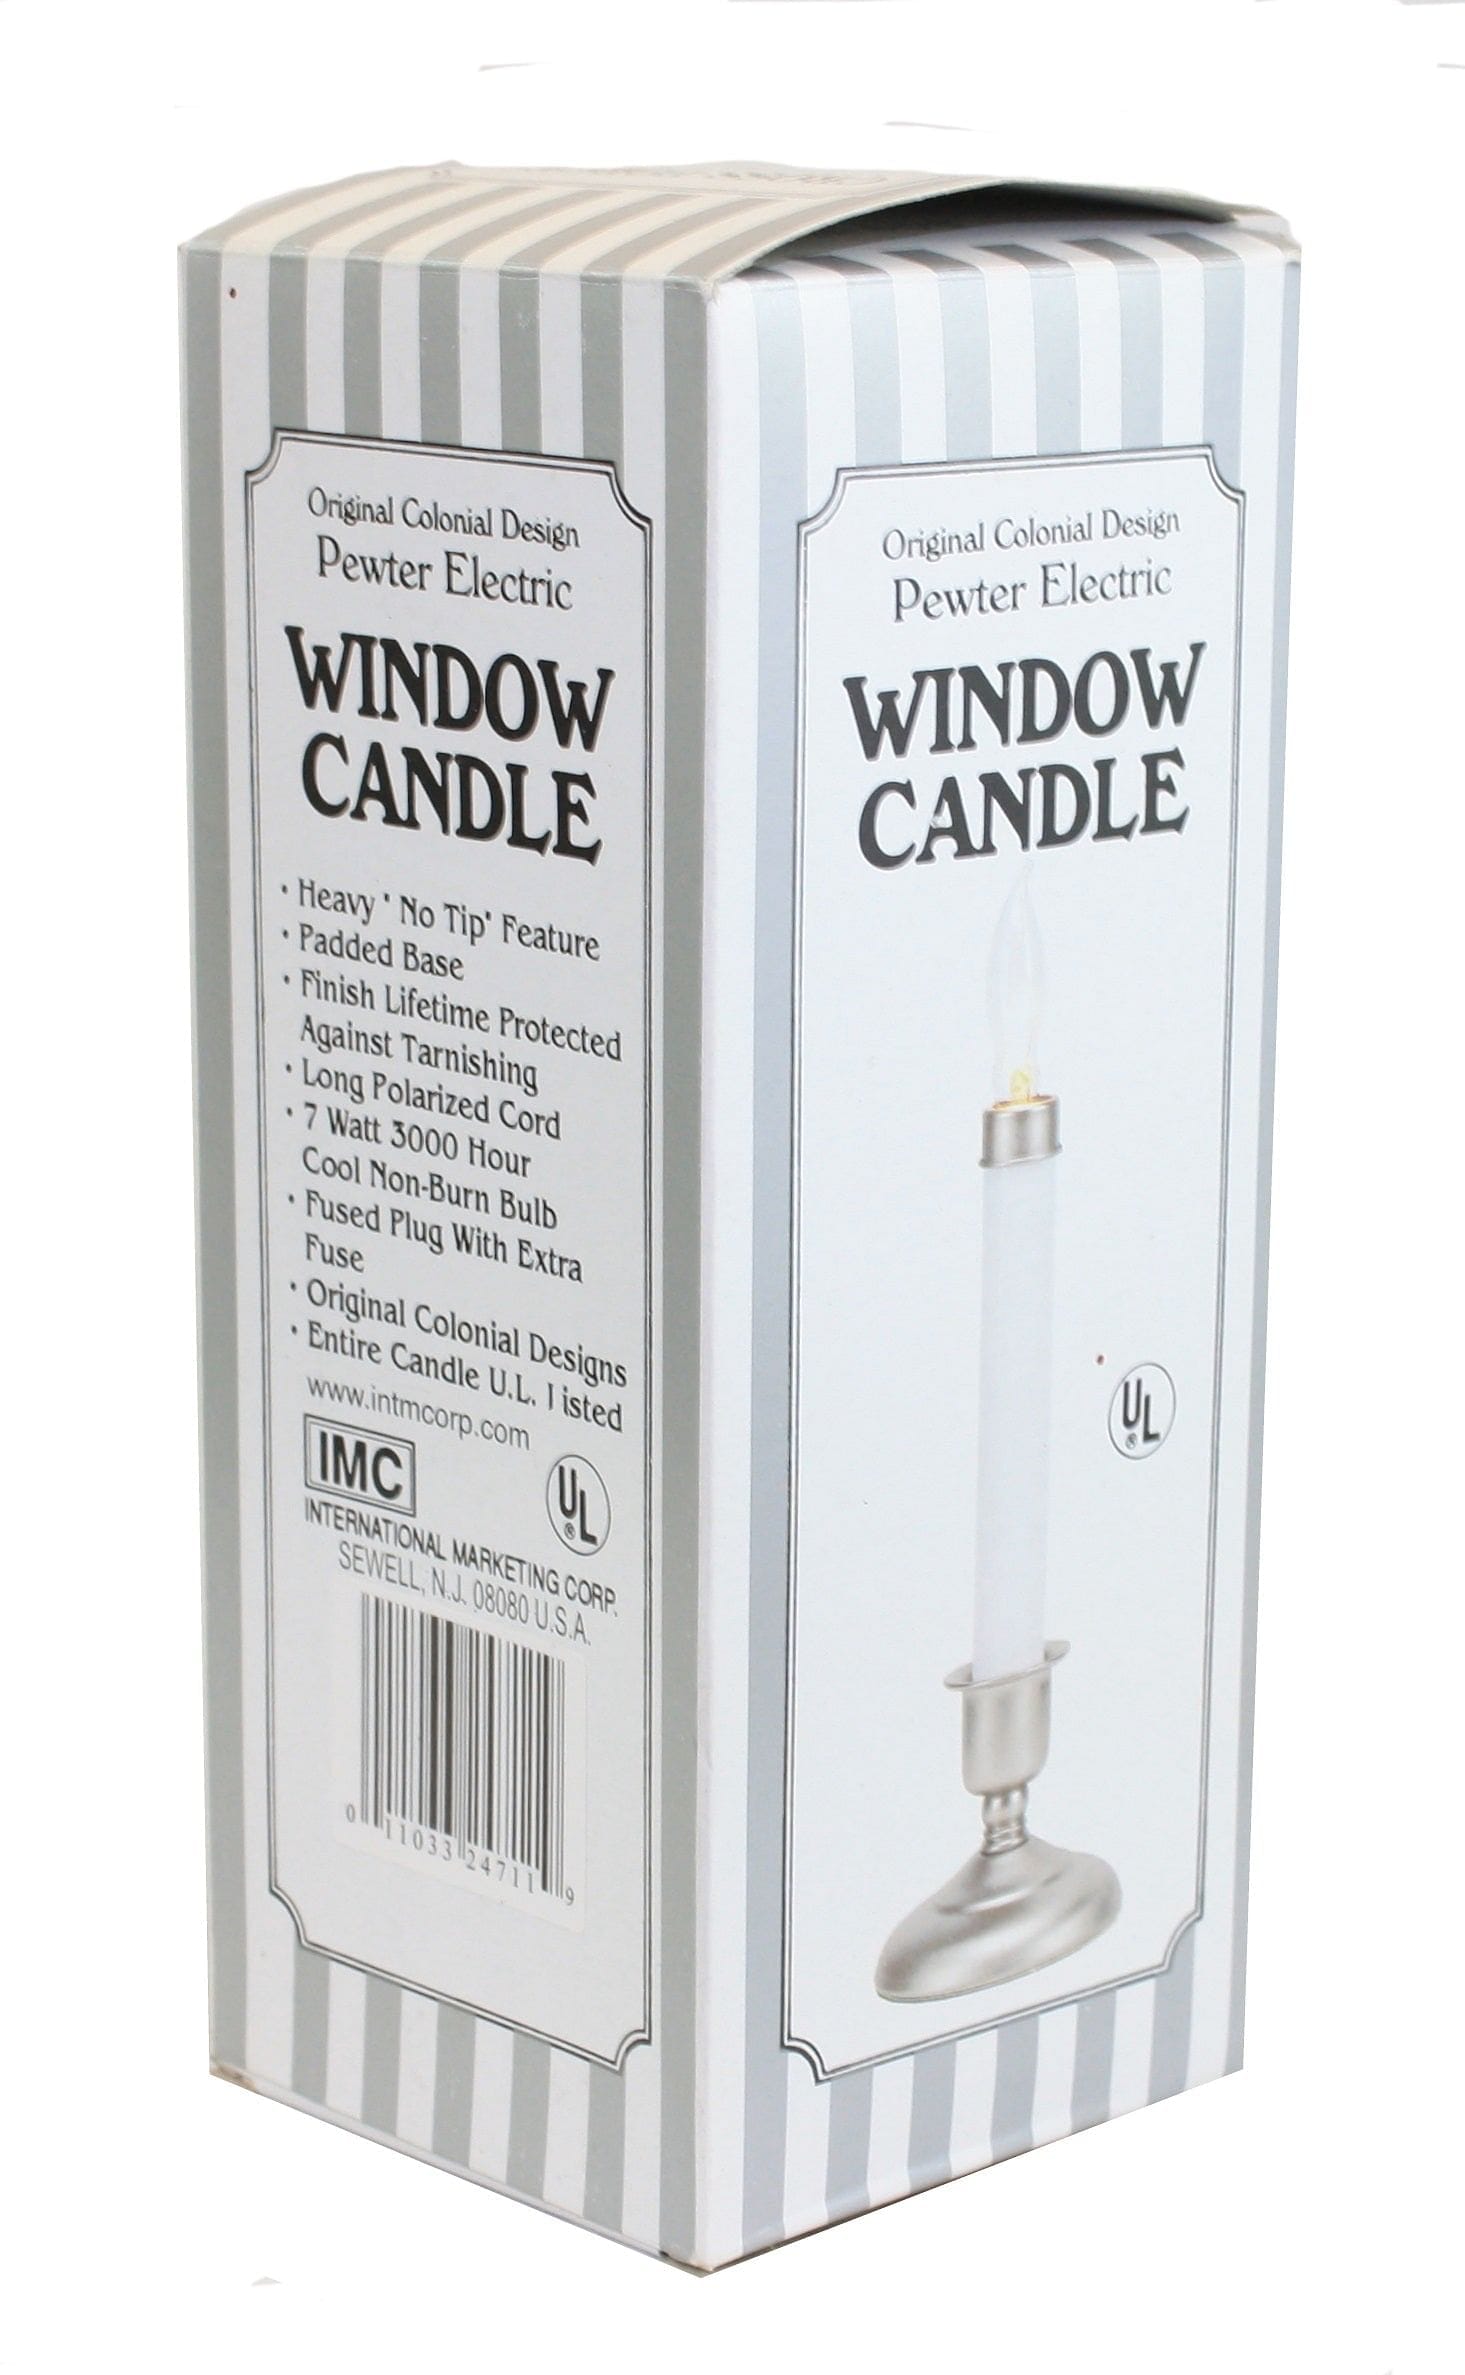 Cape Cod - Pewter Electric Sensor 9 Inch Window Candle - Shelburne Country Store